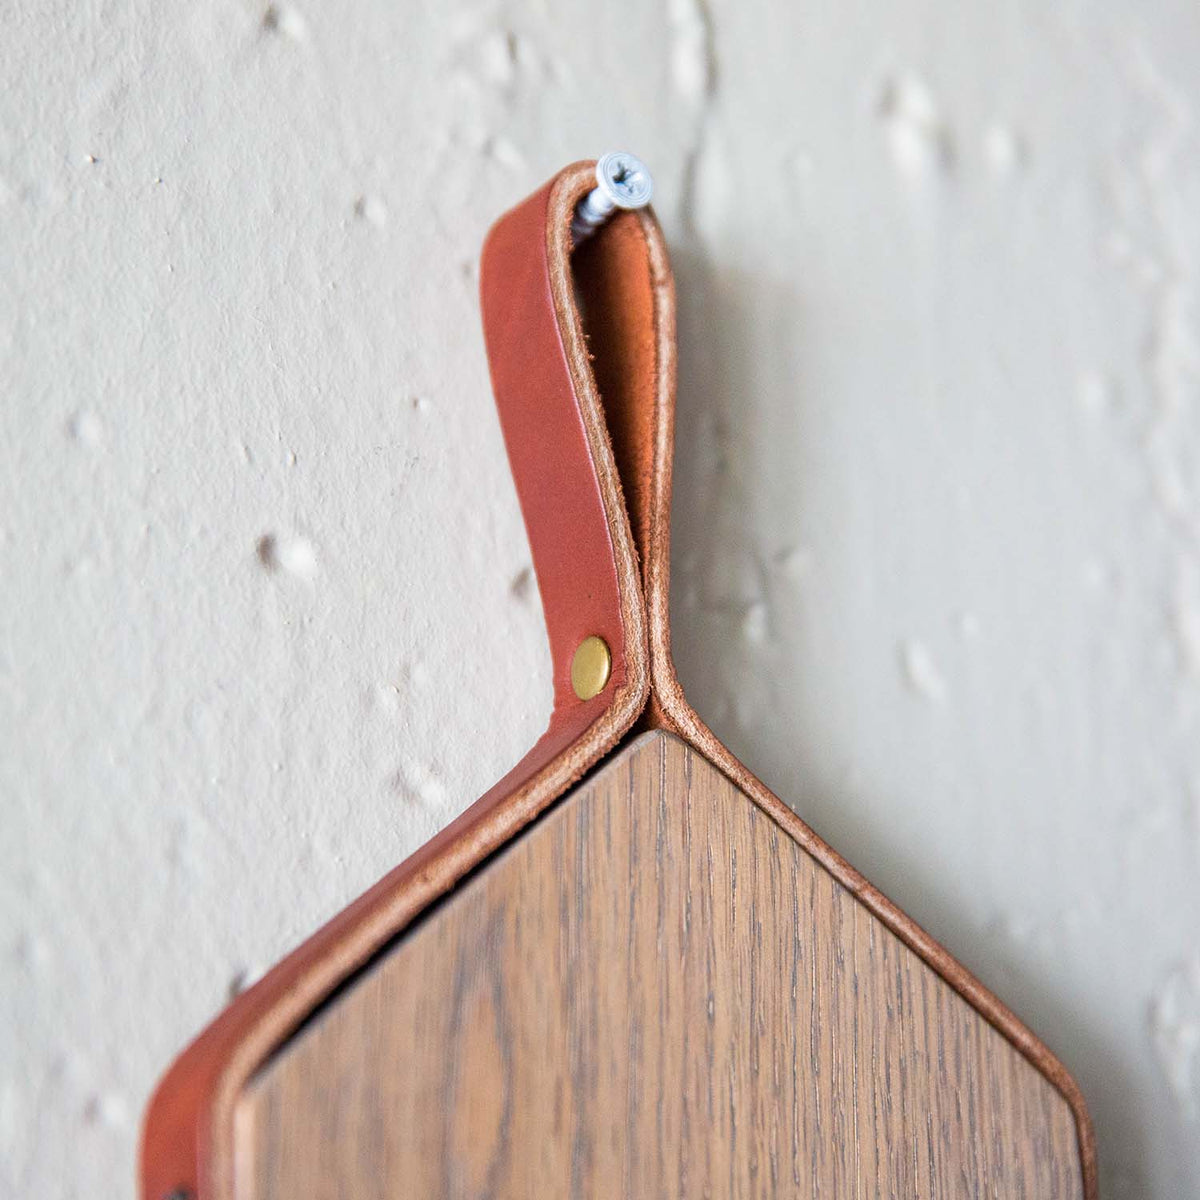 The Postman - Personalized Wall Mounted Mail Organizer &amp; Letter Rack